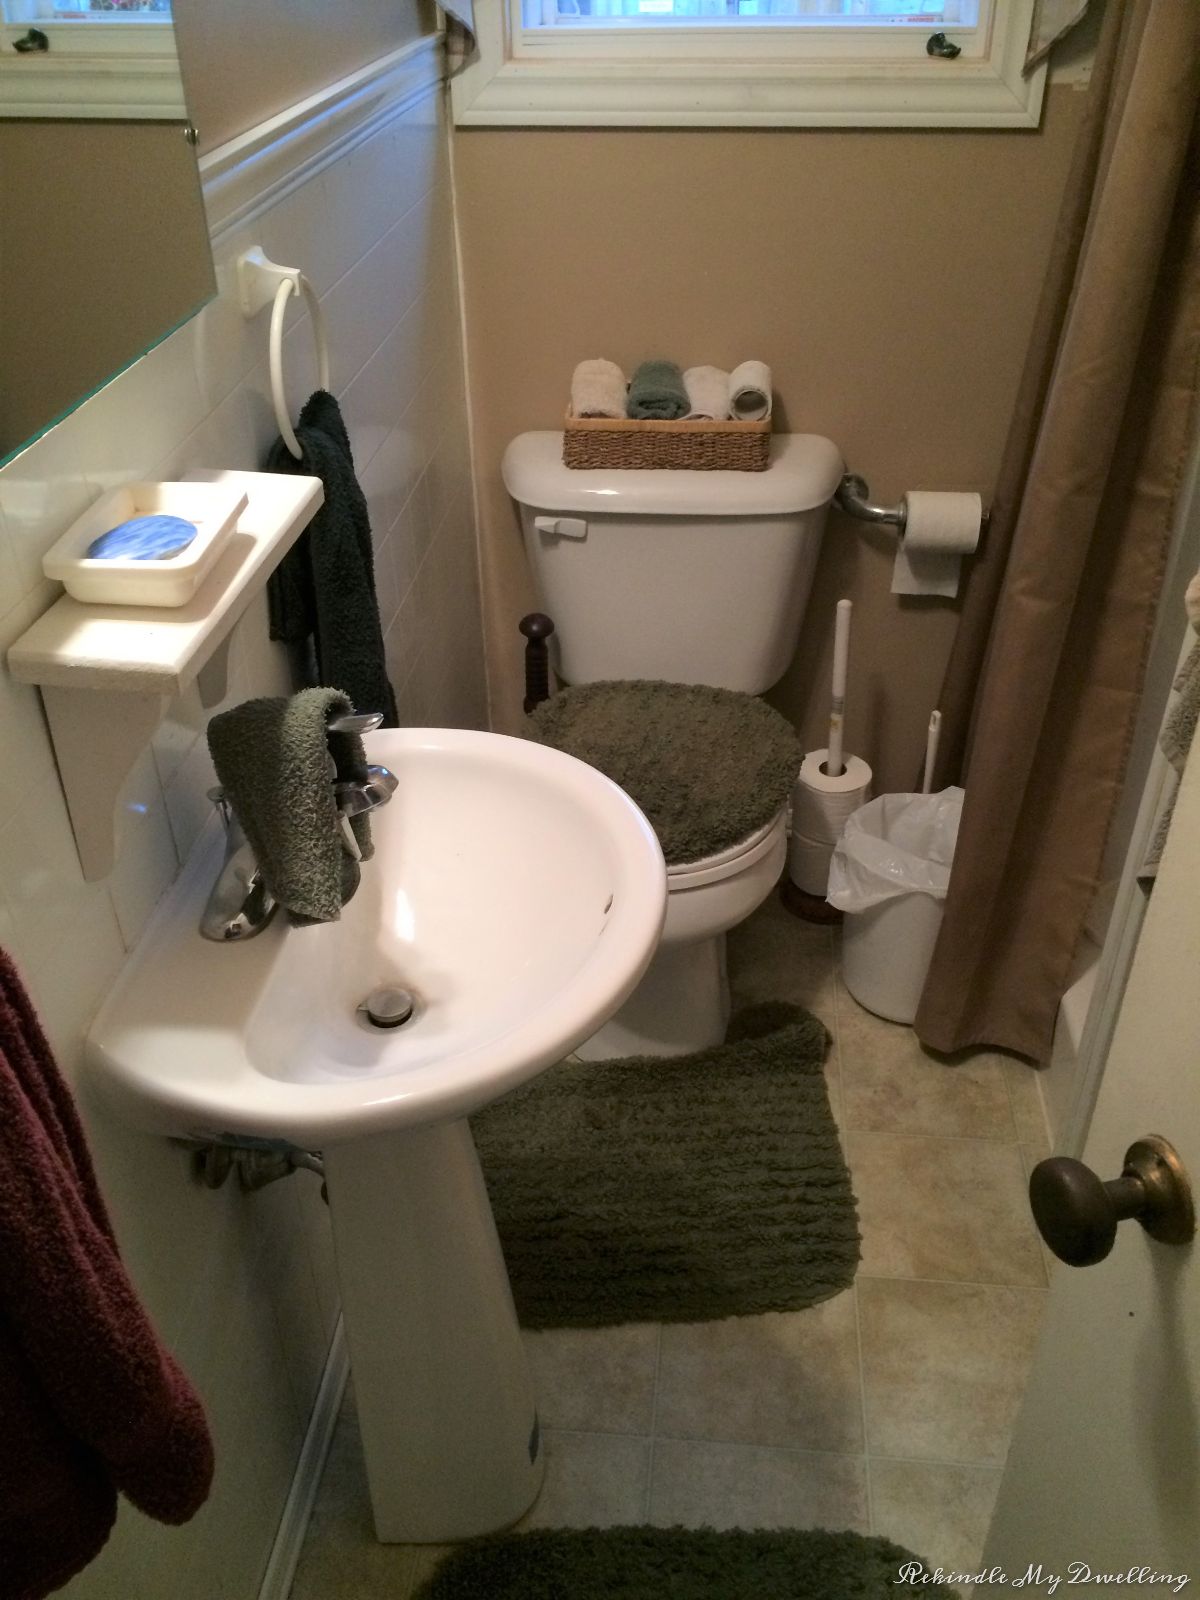 Bathroom with toilet and sink.